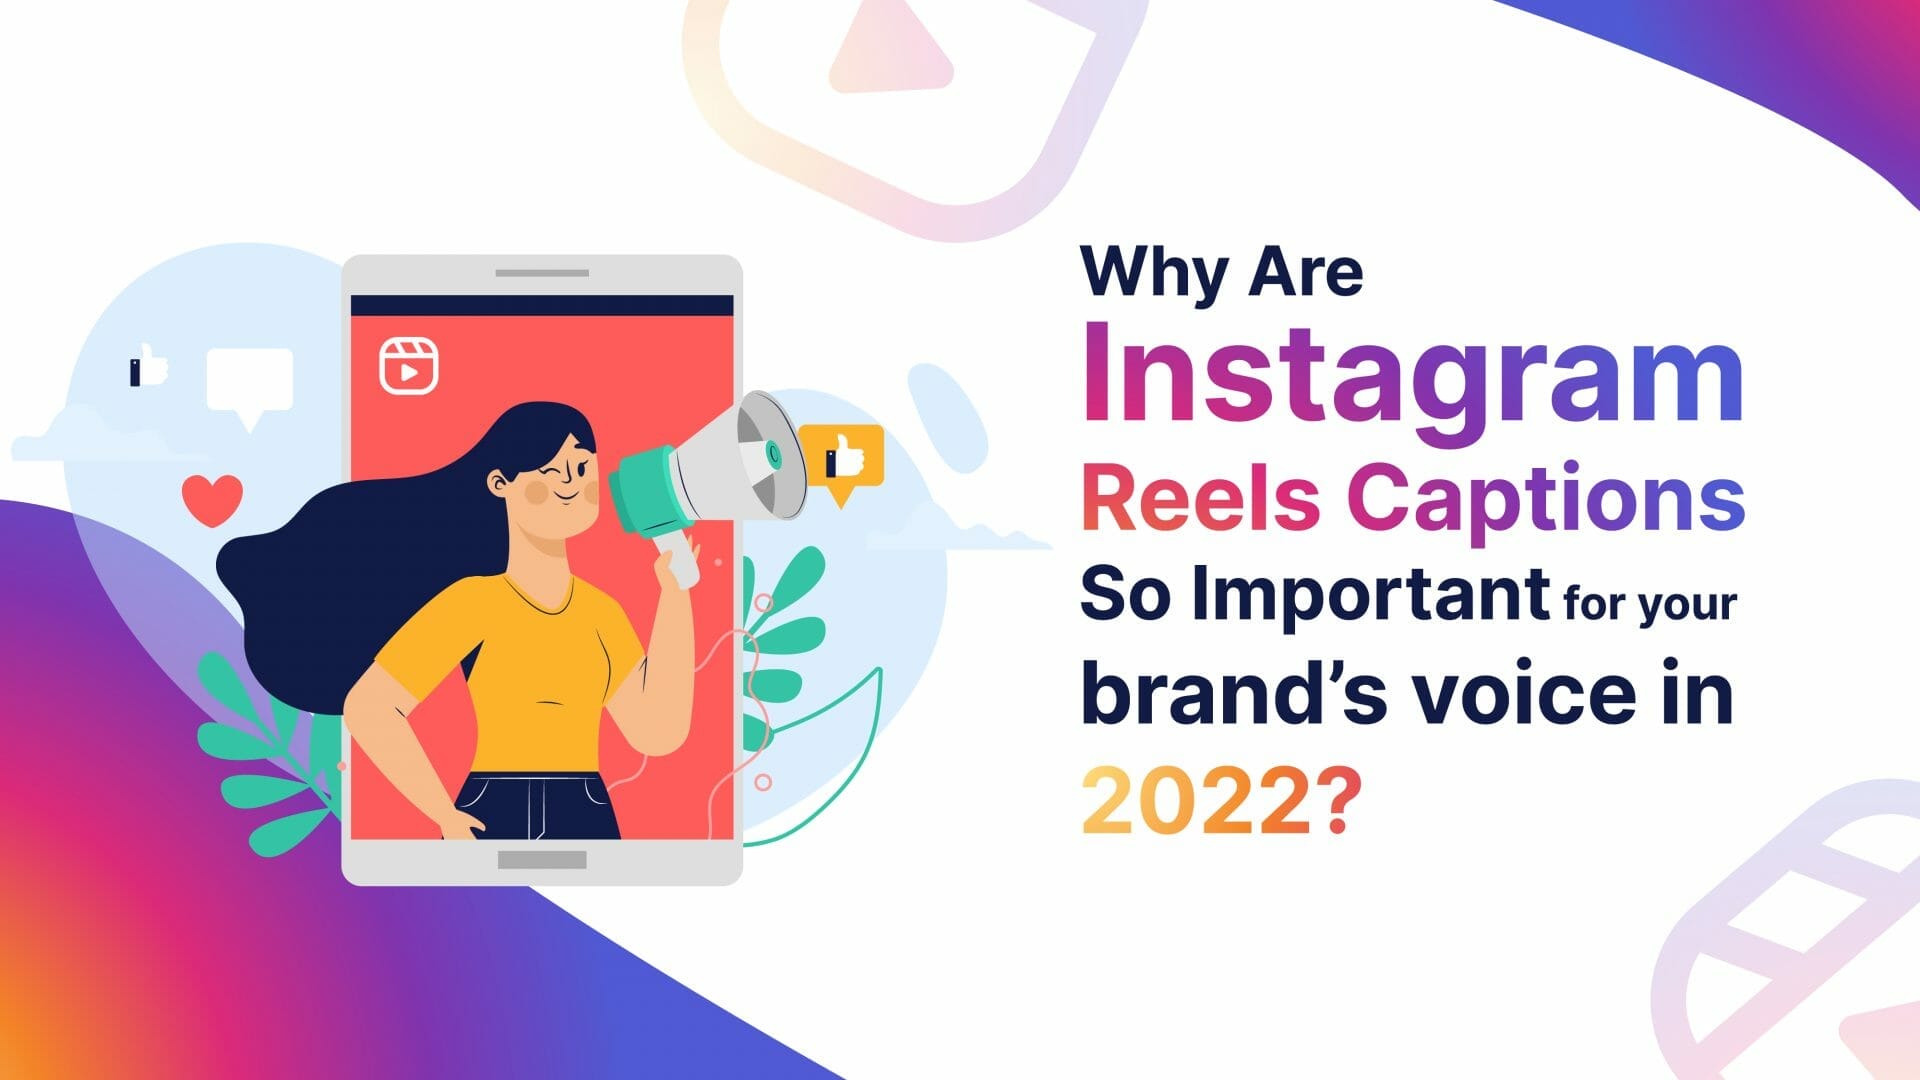 Instagram Reels Captions So Important for your brand’s voice in 2022-01